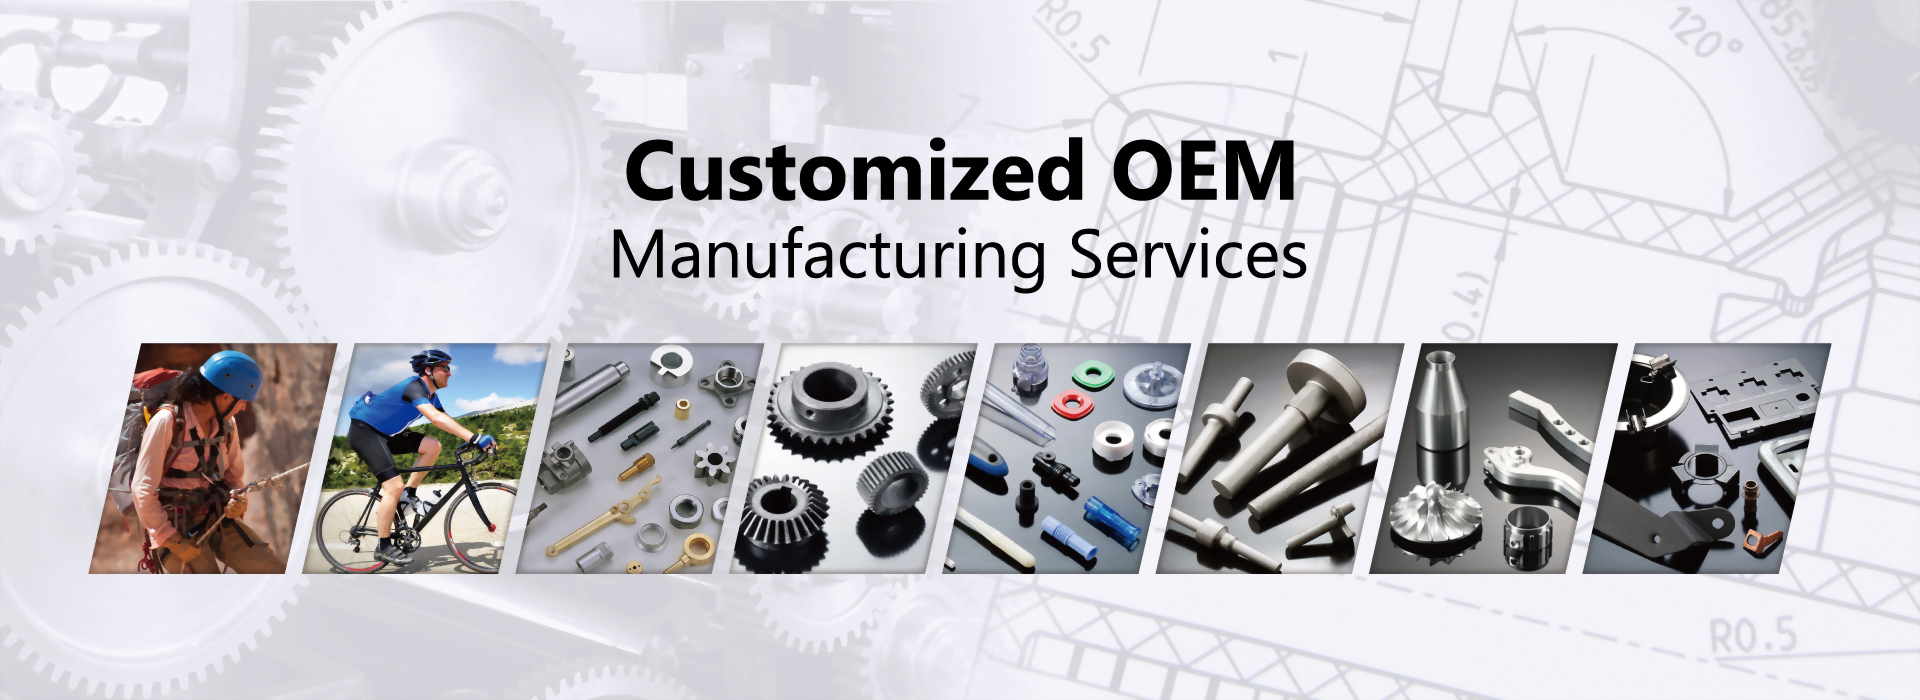 OEM Manufacturing Services